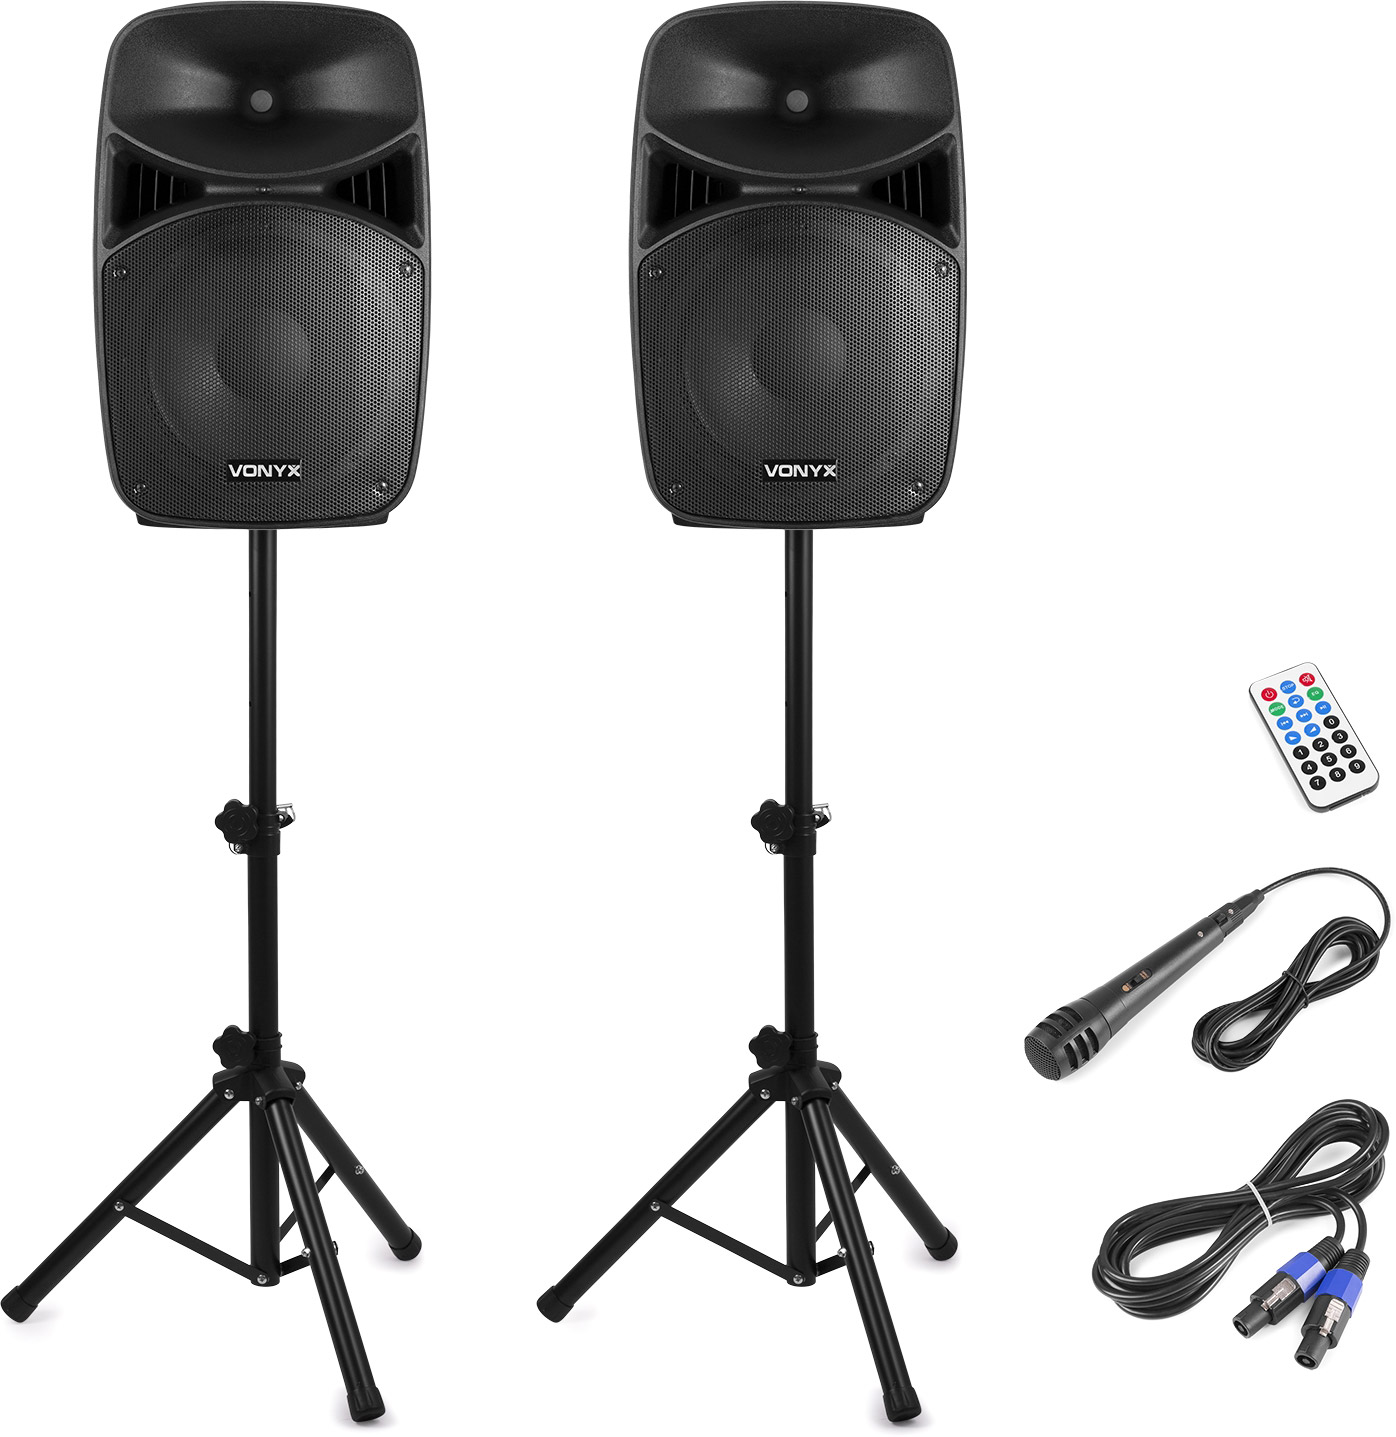 Vonyx VPS152A Plug & Play 1000W Speaker Set with Stands - cheap at LTT